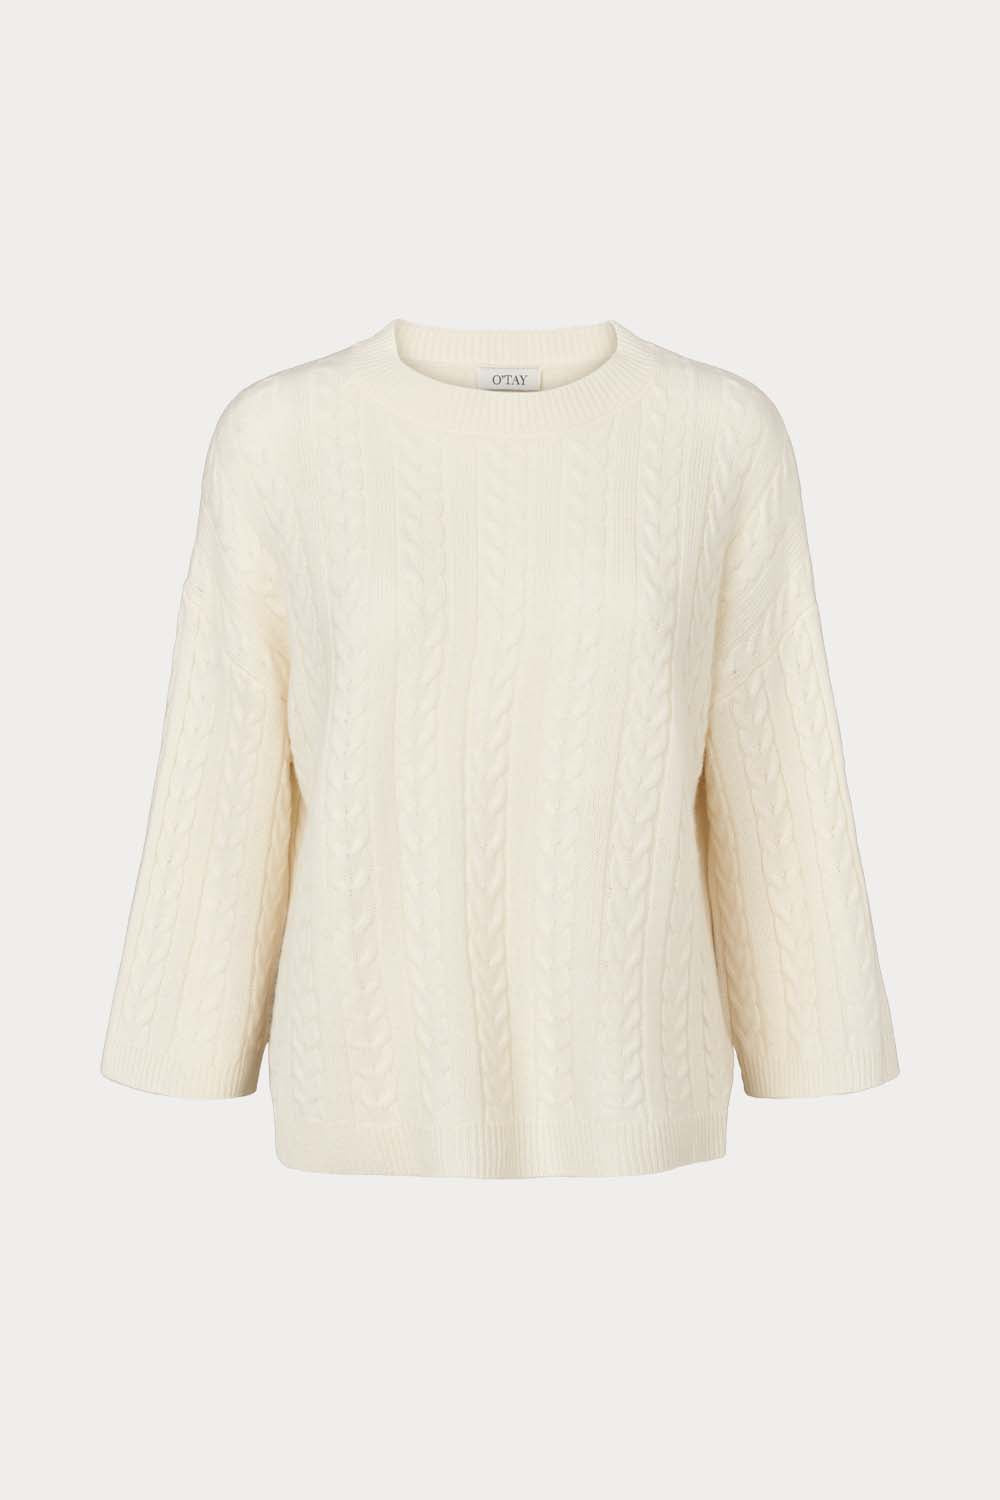 O'TAY Berry Sweater Blouses Off White